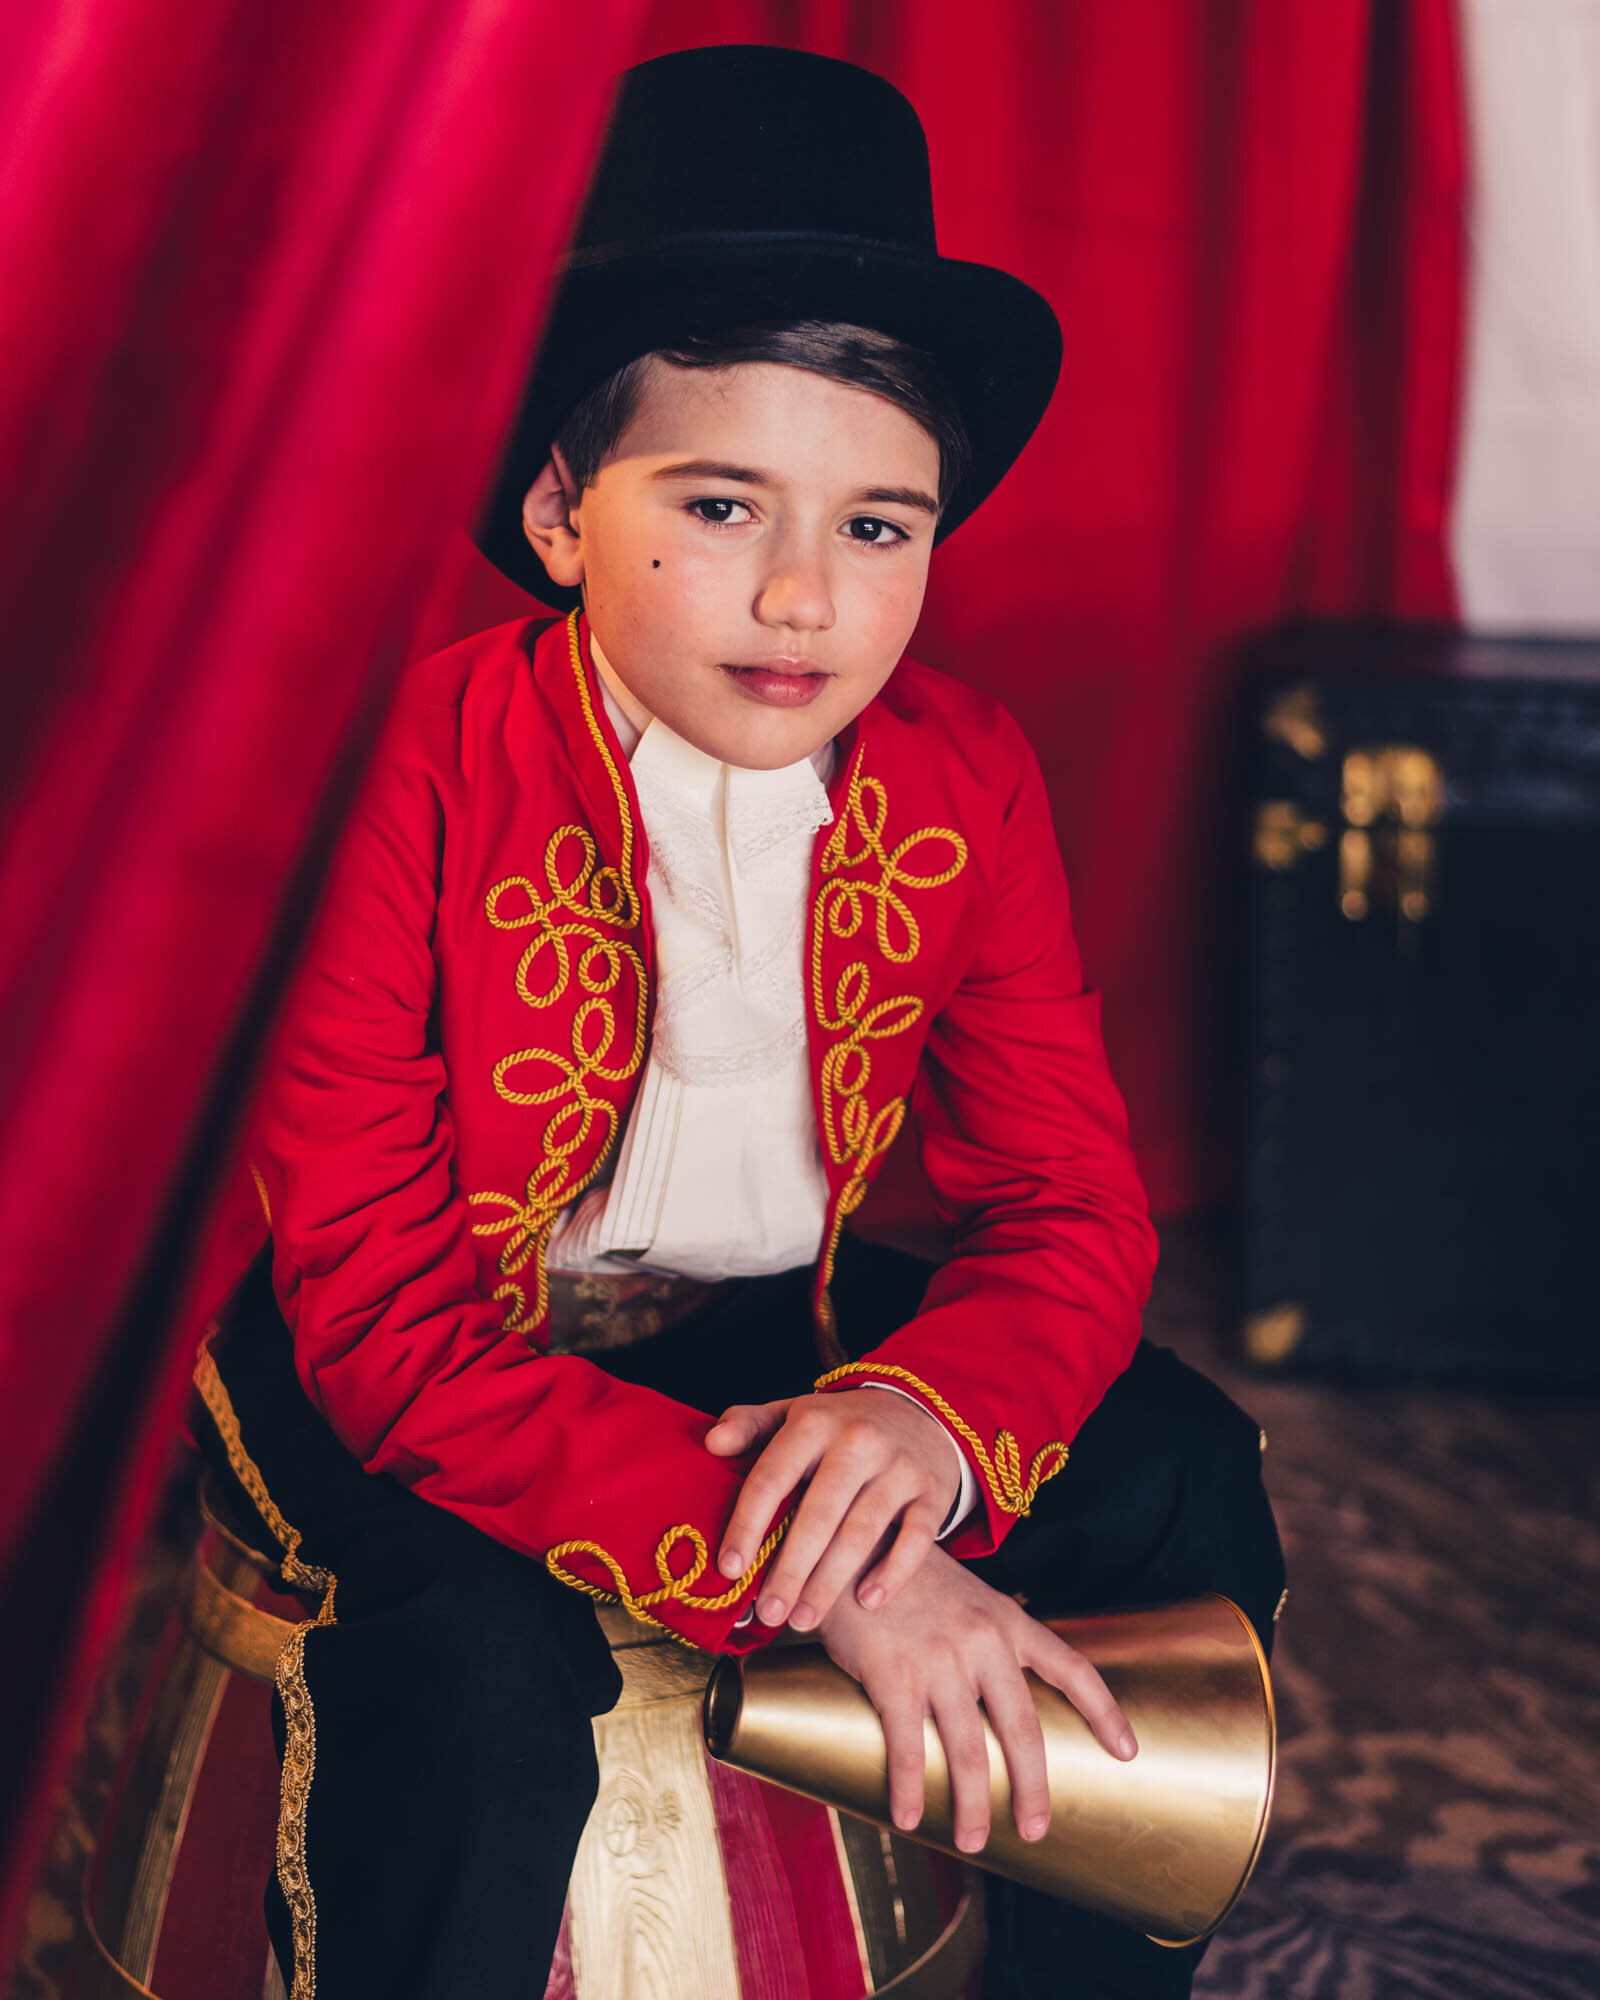 Kids Circus Ringmaster Costume - JACKET, TROUSERS and TOP HAT